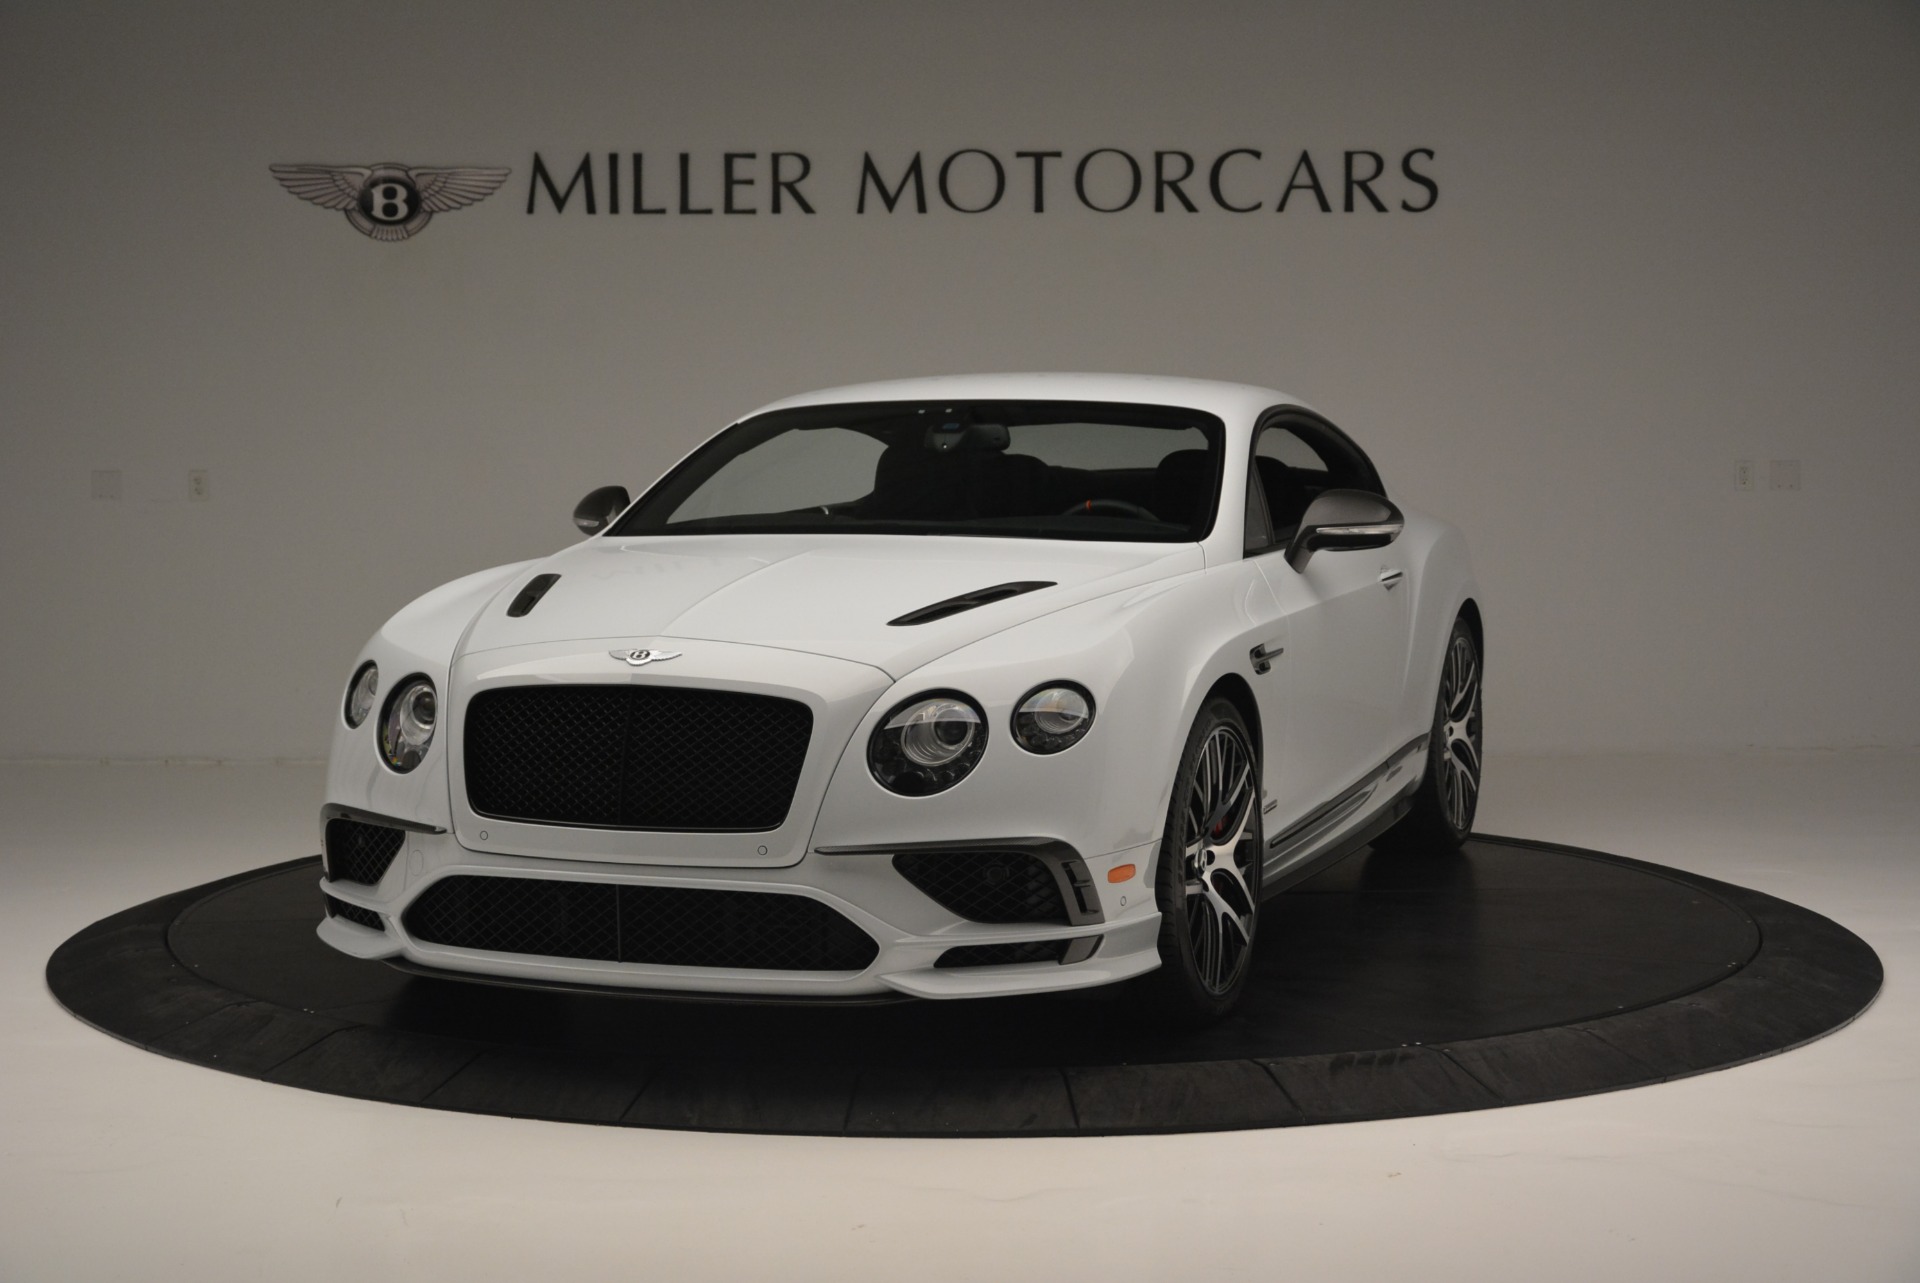 Used 2017 Bentley Continental GT Supersports for sale Sold at Aston Martin of Greenwich in Greenwich CT 06830 1